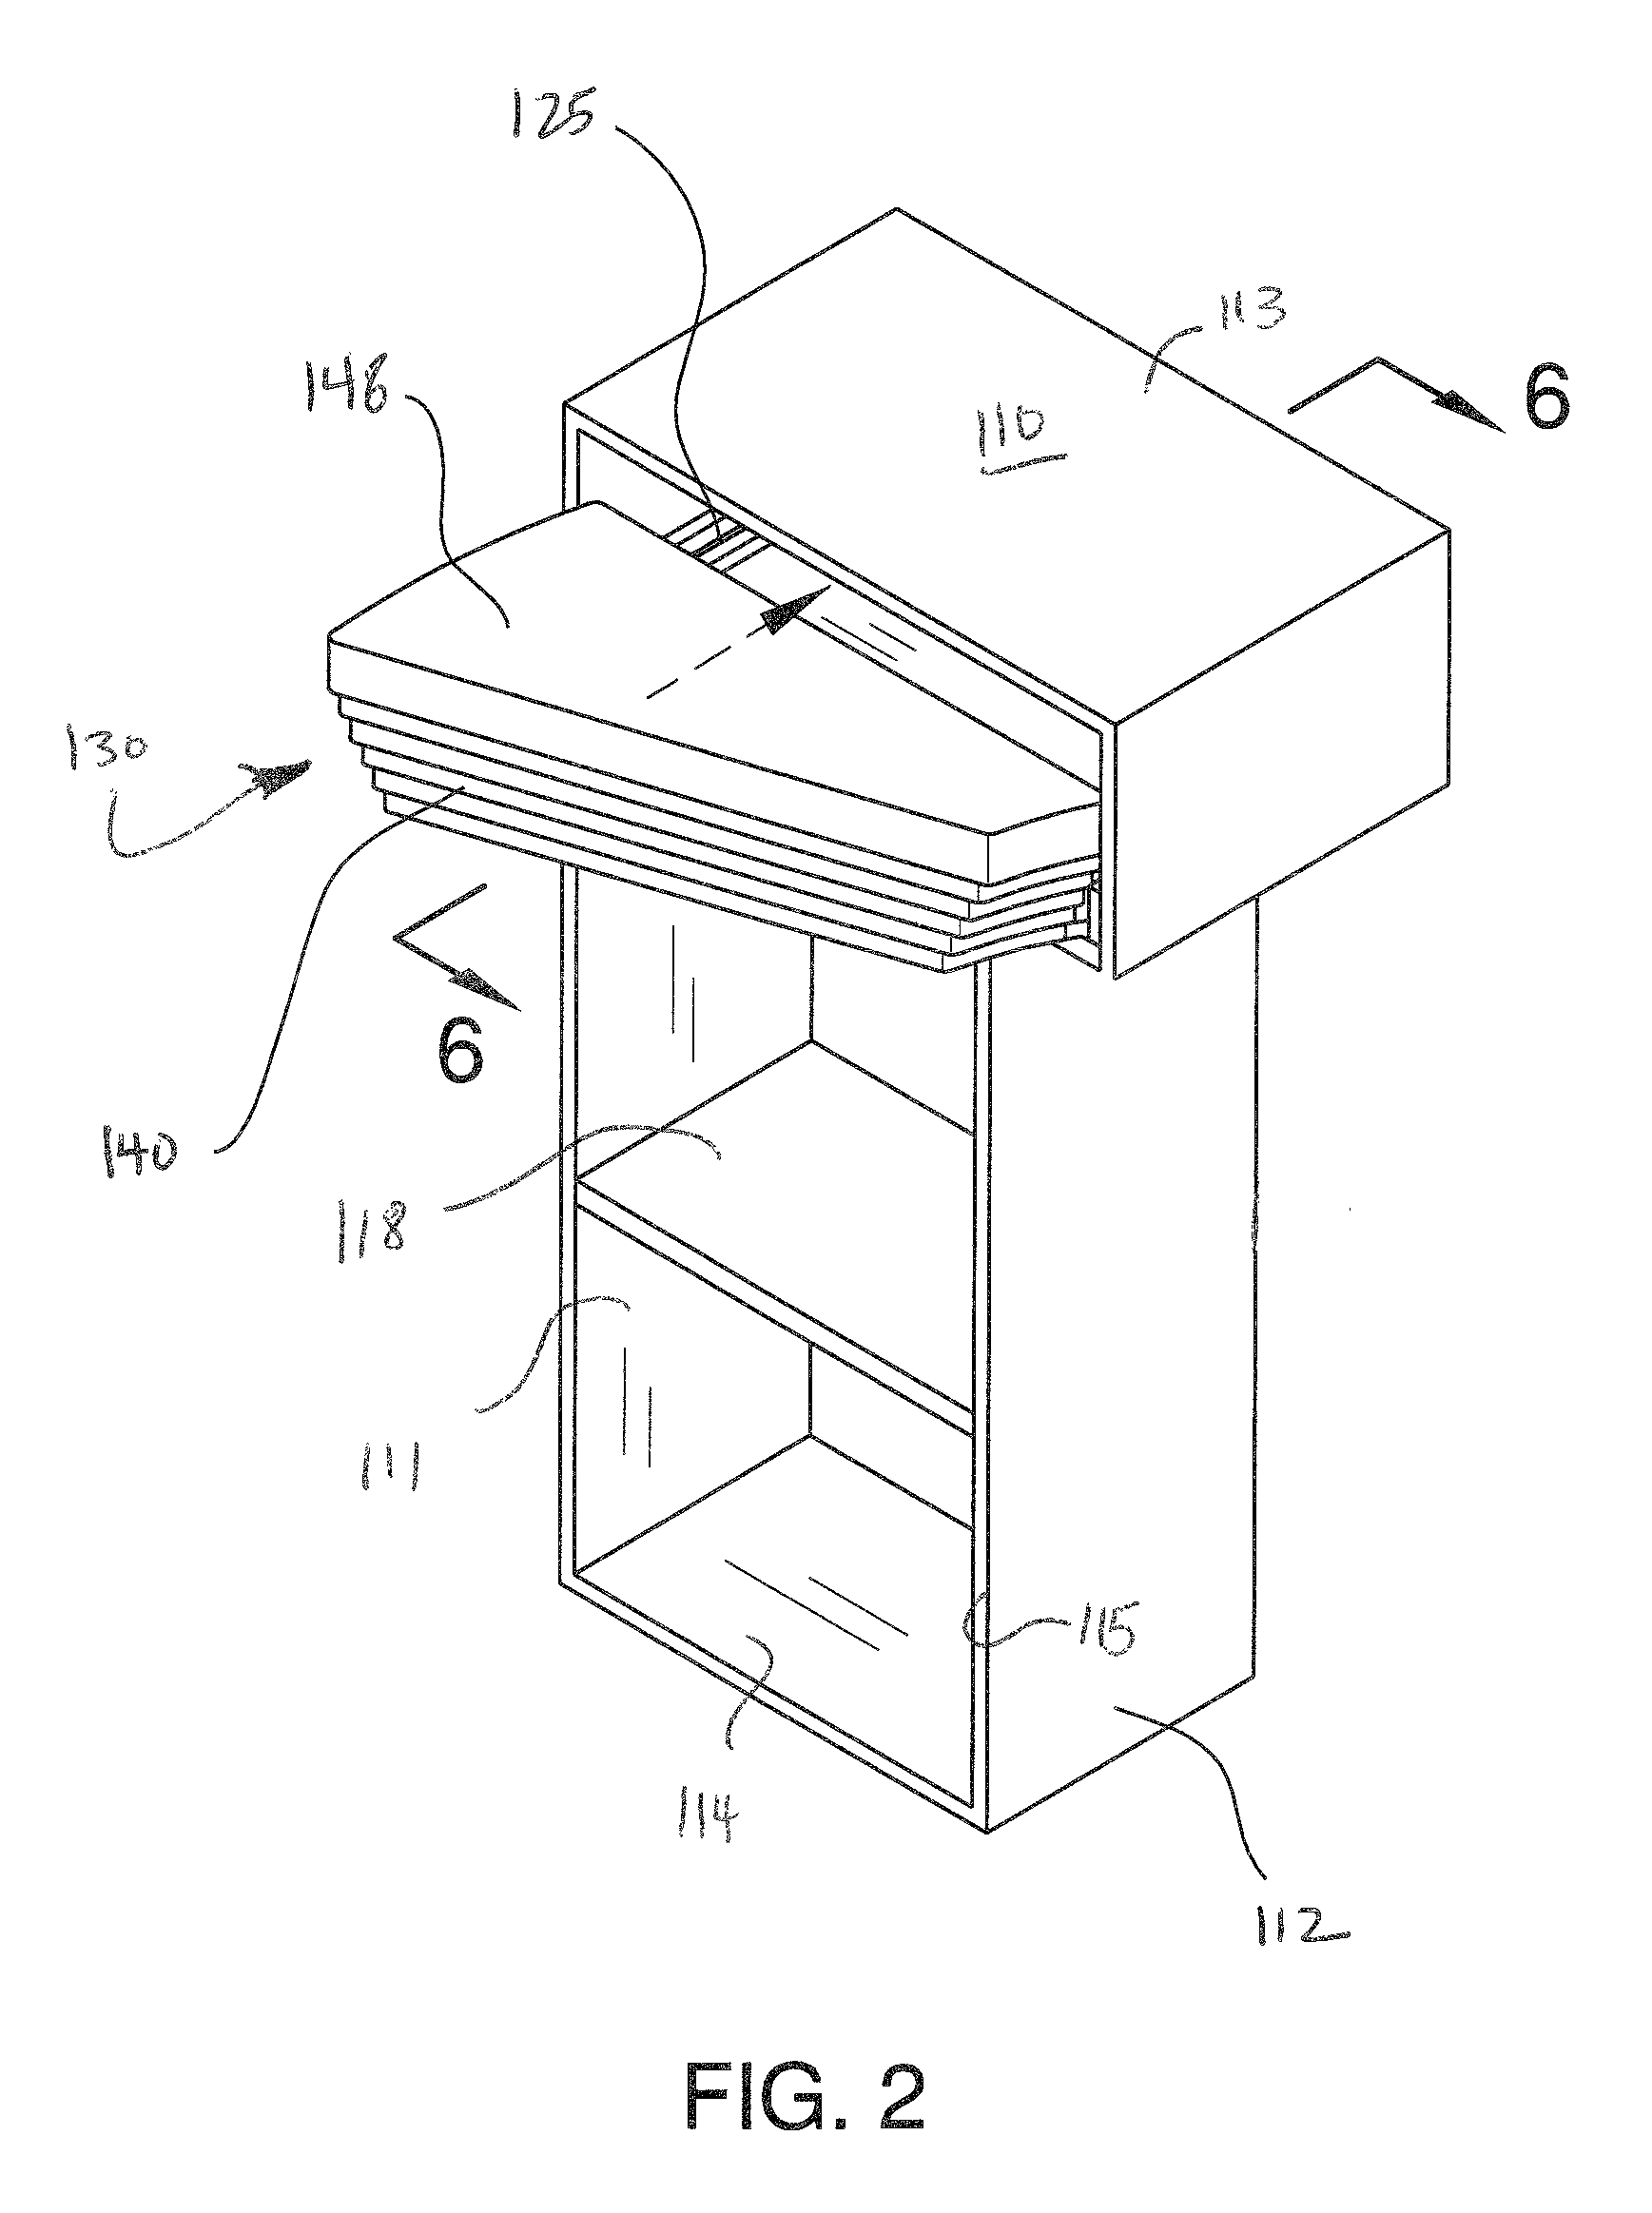 Expandable table device for diaper changes